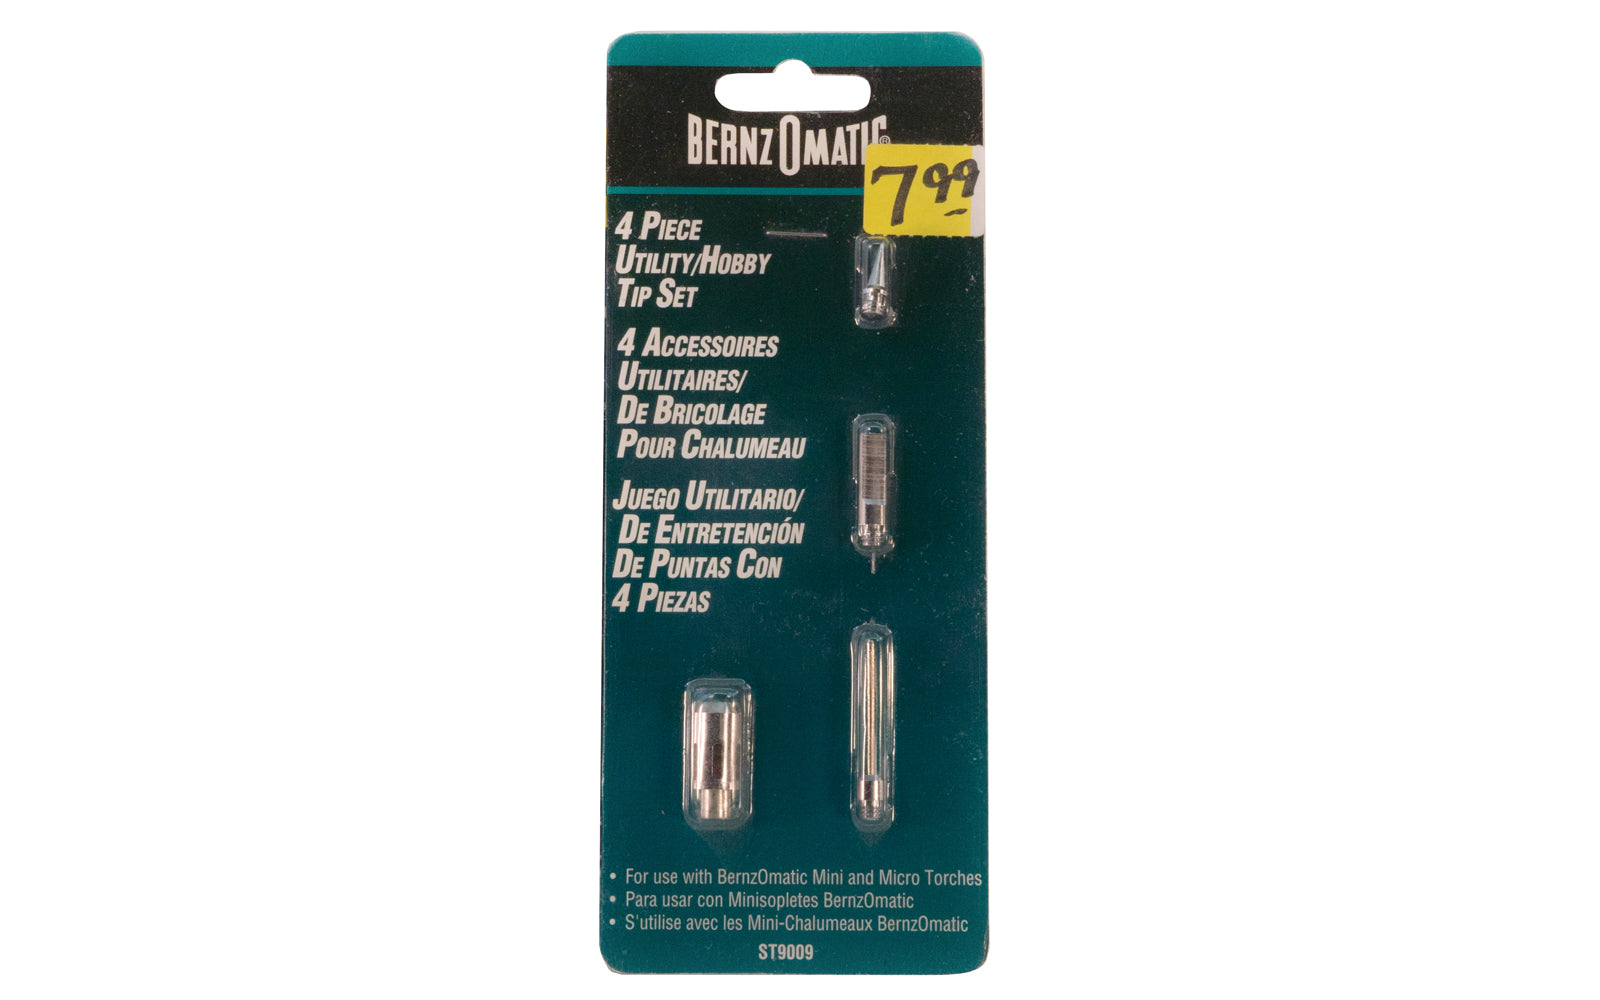 Bernzomatic 4-Piece Utility Hobby Tip Set. Designed for use with Bernzomatic mini & micro torches. Bernzomatic Model ST9009.